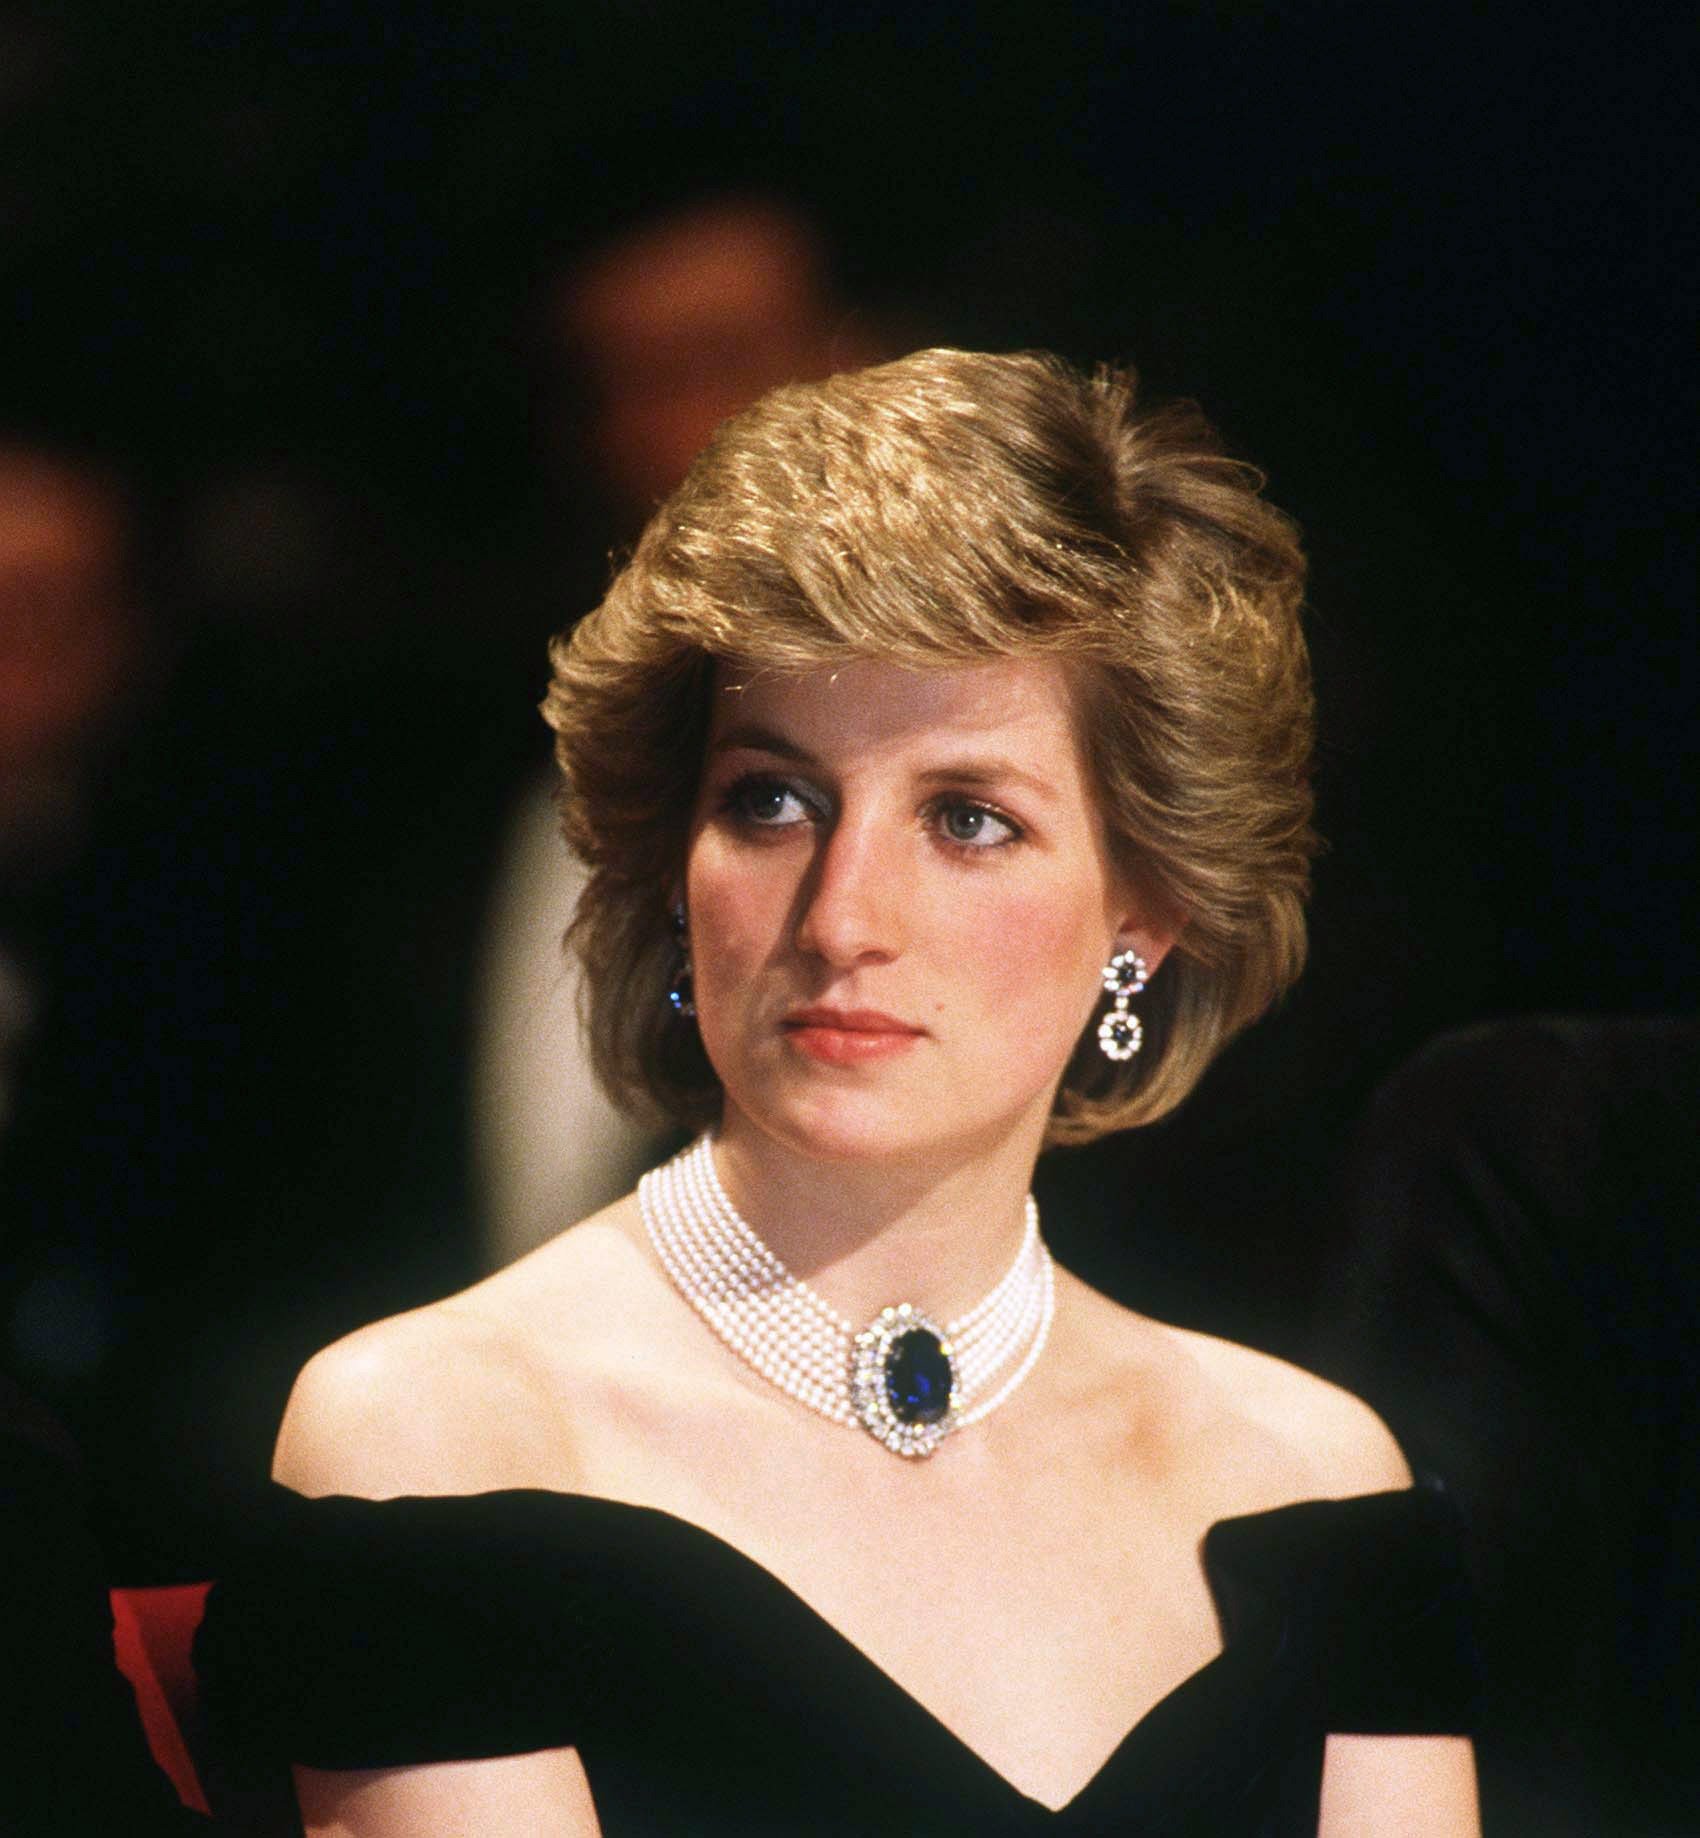 Diana, Princess of Wales, wearing a sapphire diamond and pearl necklace, attends a banquet on April 16, 1986 in Vienna, Austria | Photo: GettyImages